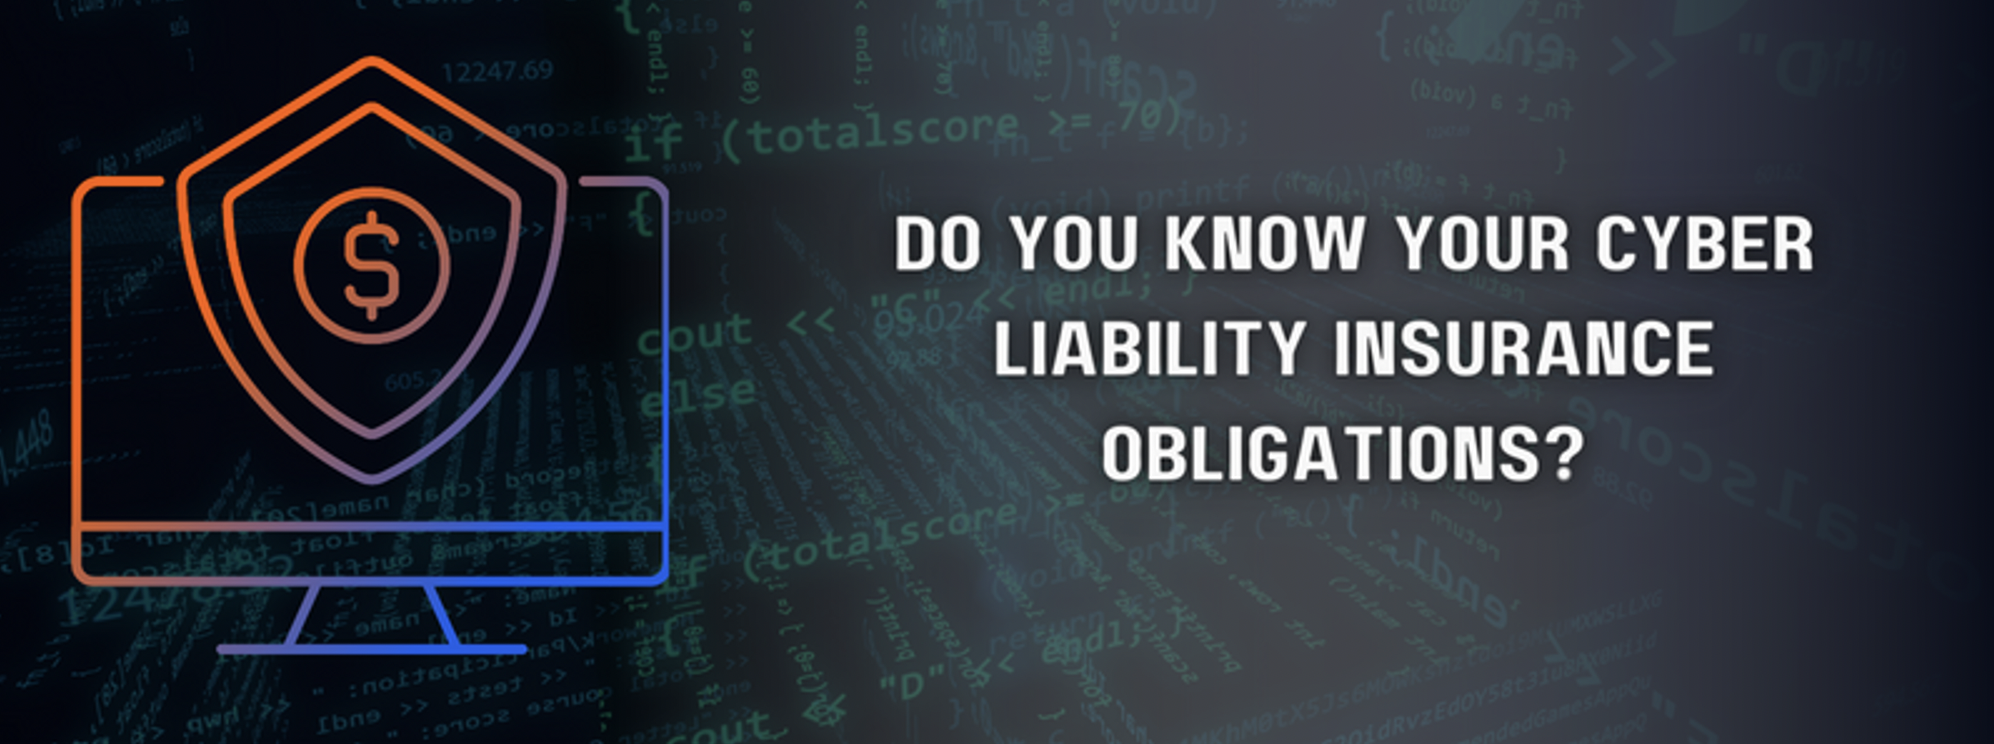 Do You Know Your Cyber Liability Insurance Obligations?